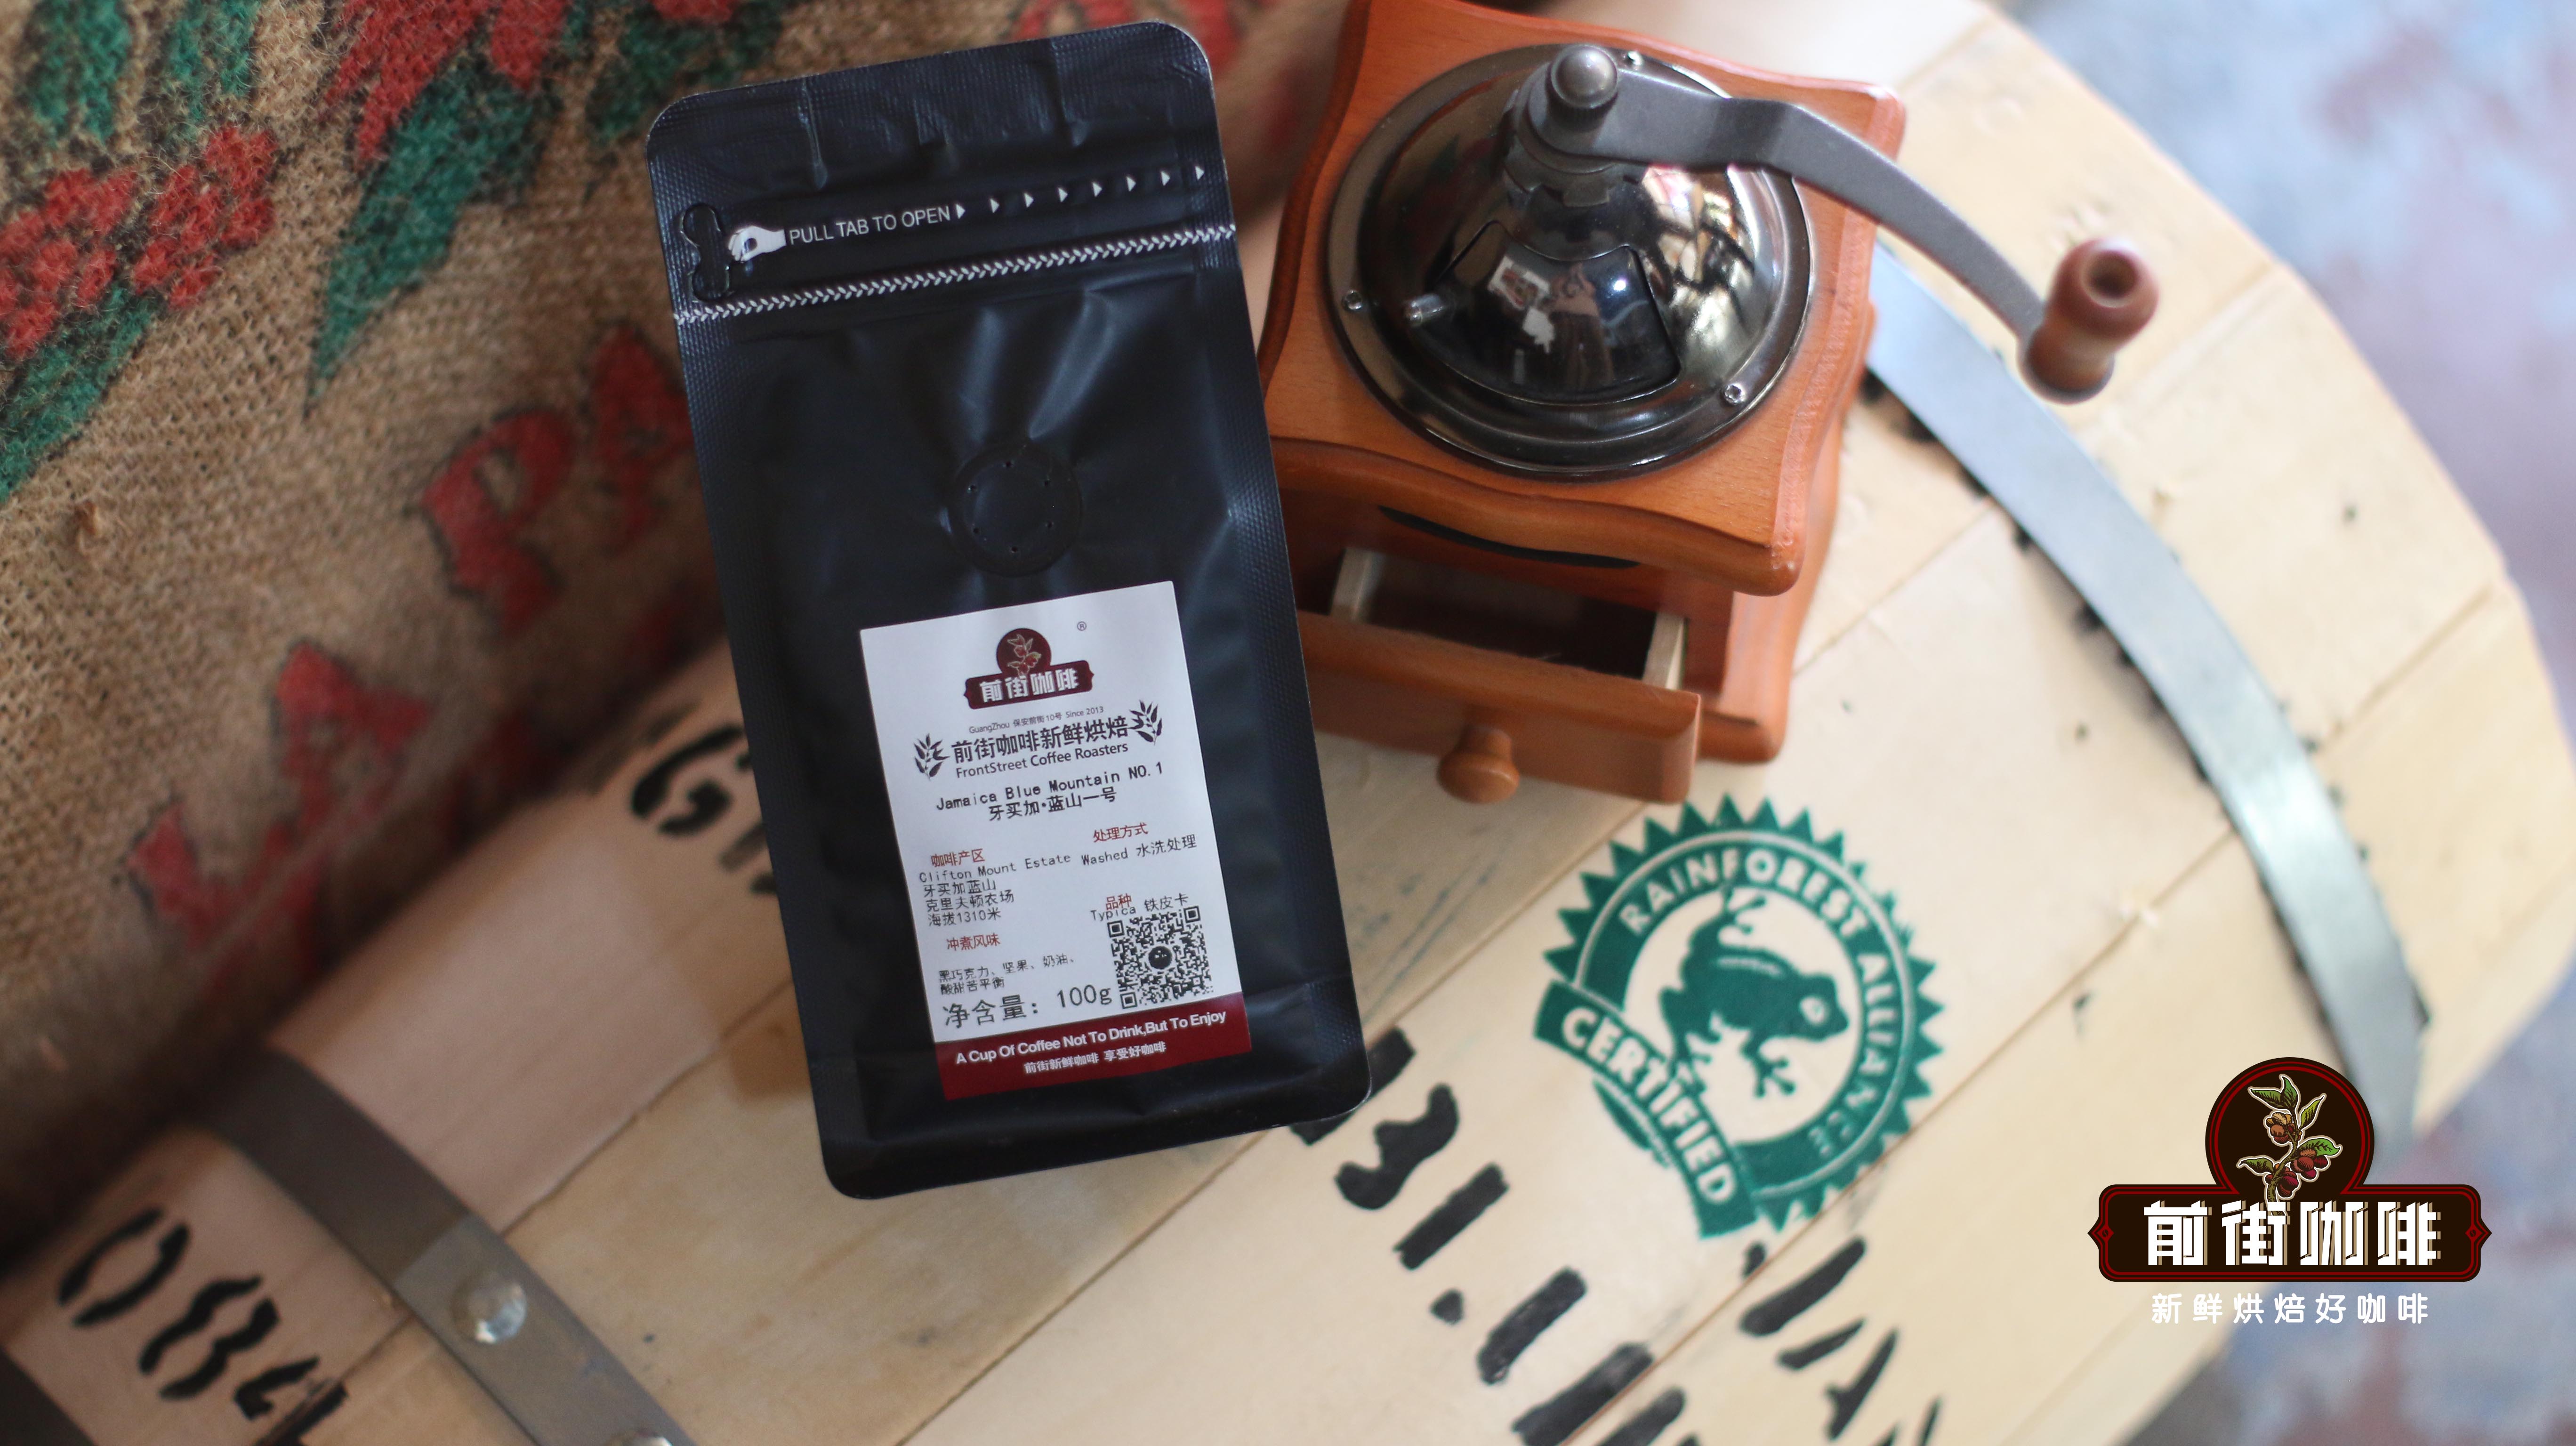 Jamaica Blue Mountain Coffee 7 brewing methods Blue Mountain No. 1 coffee is the right way to drink?